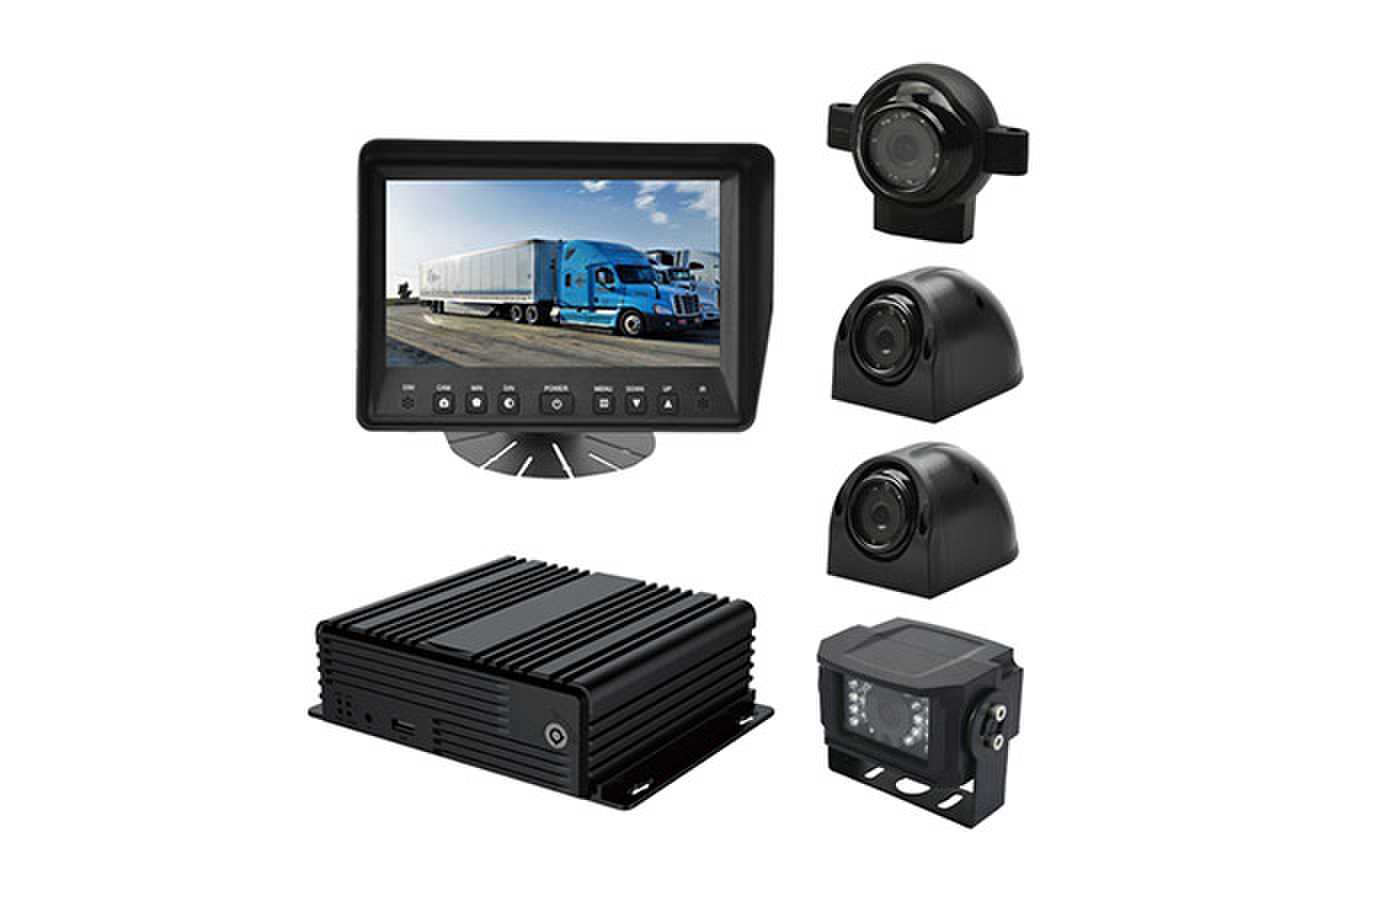 What are the benefits of a car hard disk video recorder？